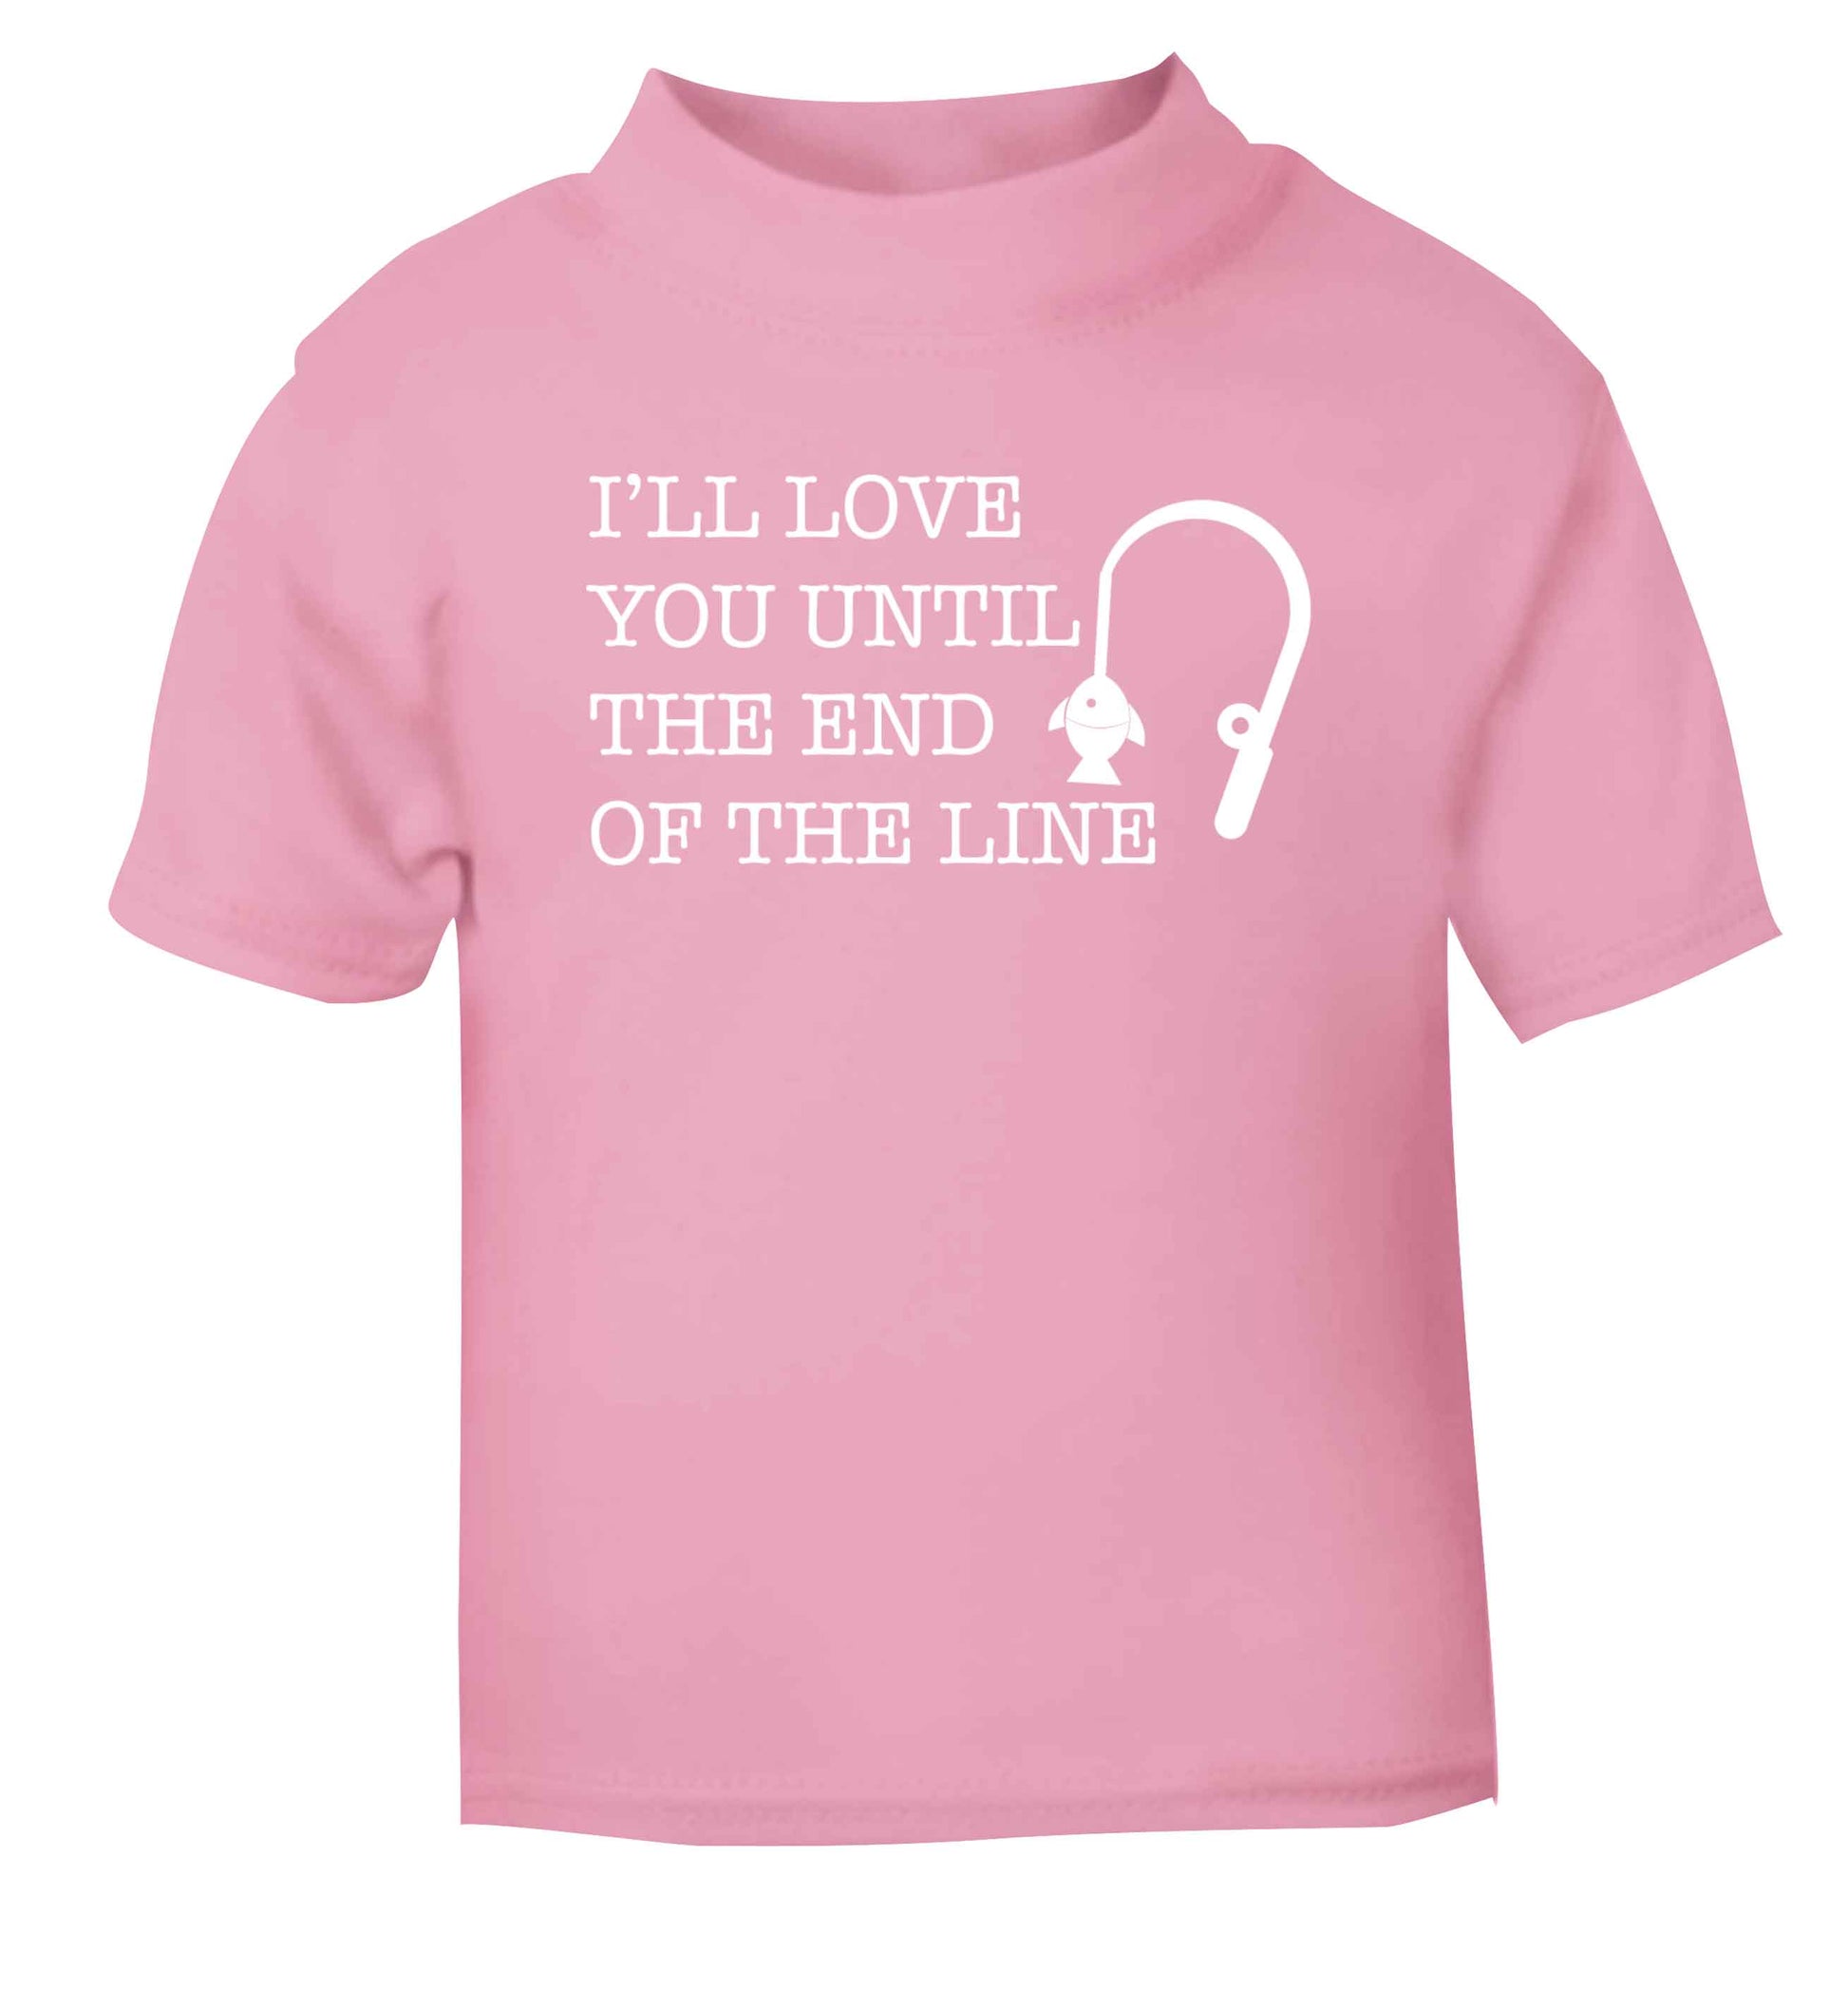 I'll love you until the end of the line light pink Baby Toddler Tshirt 2 Years